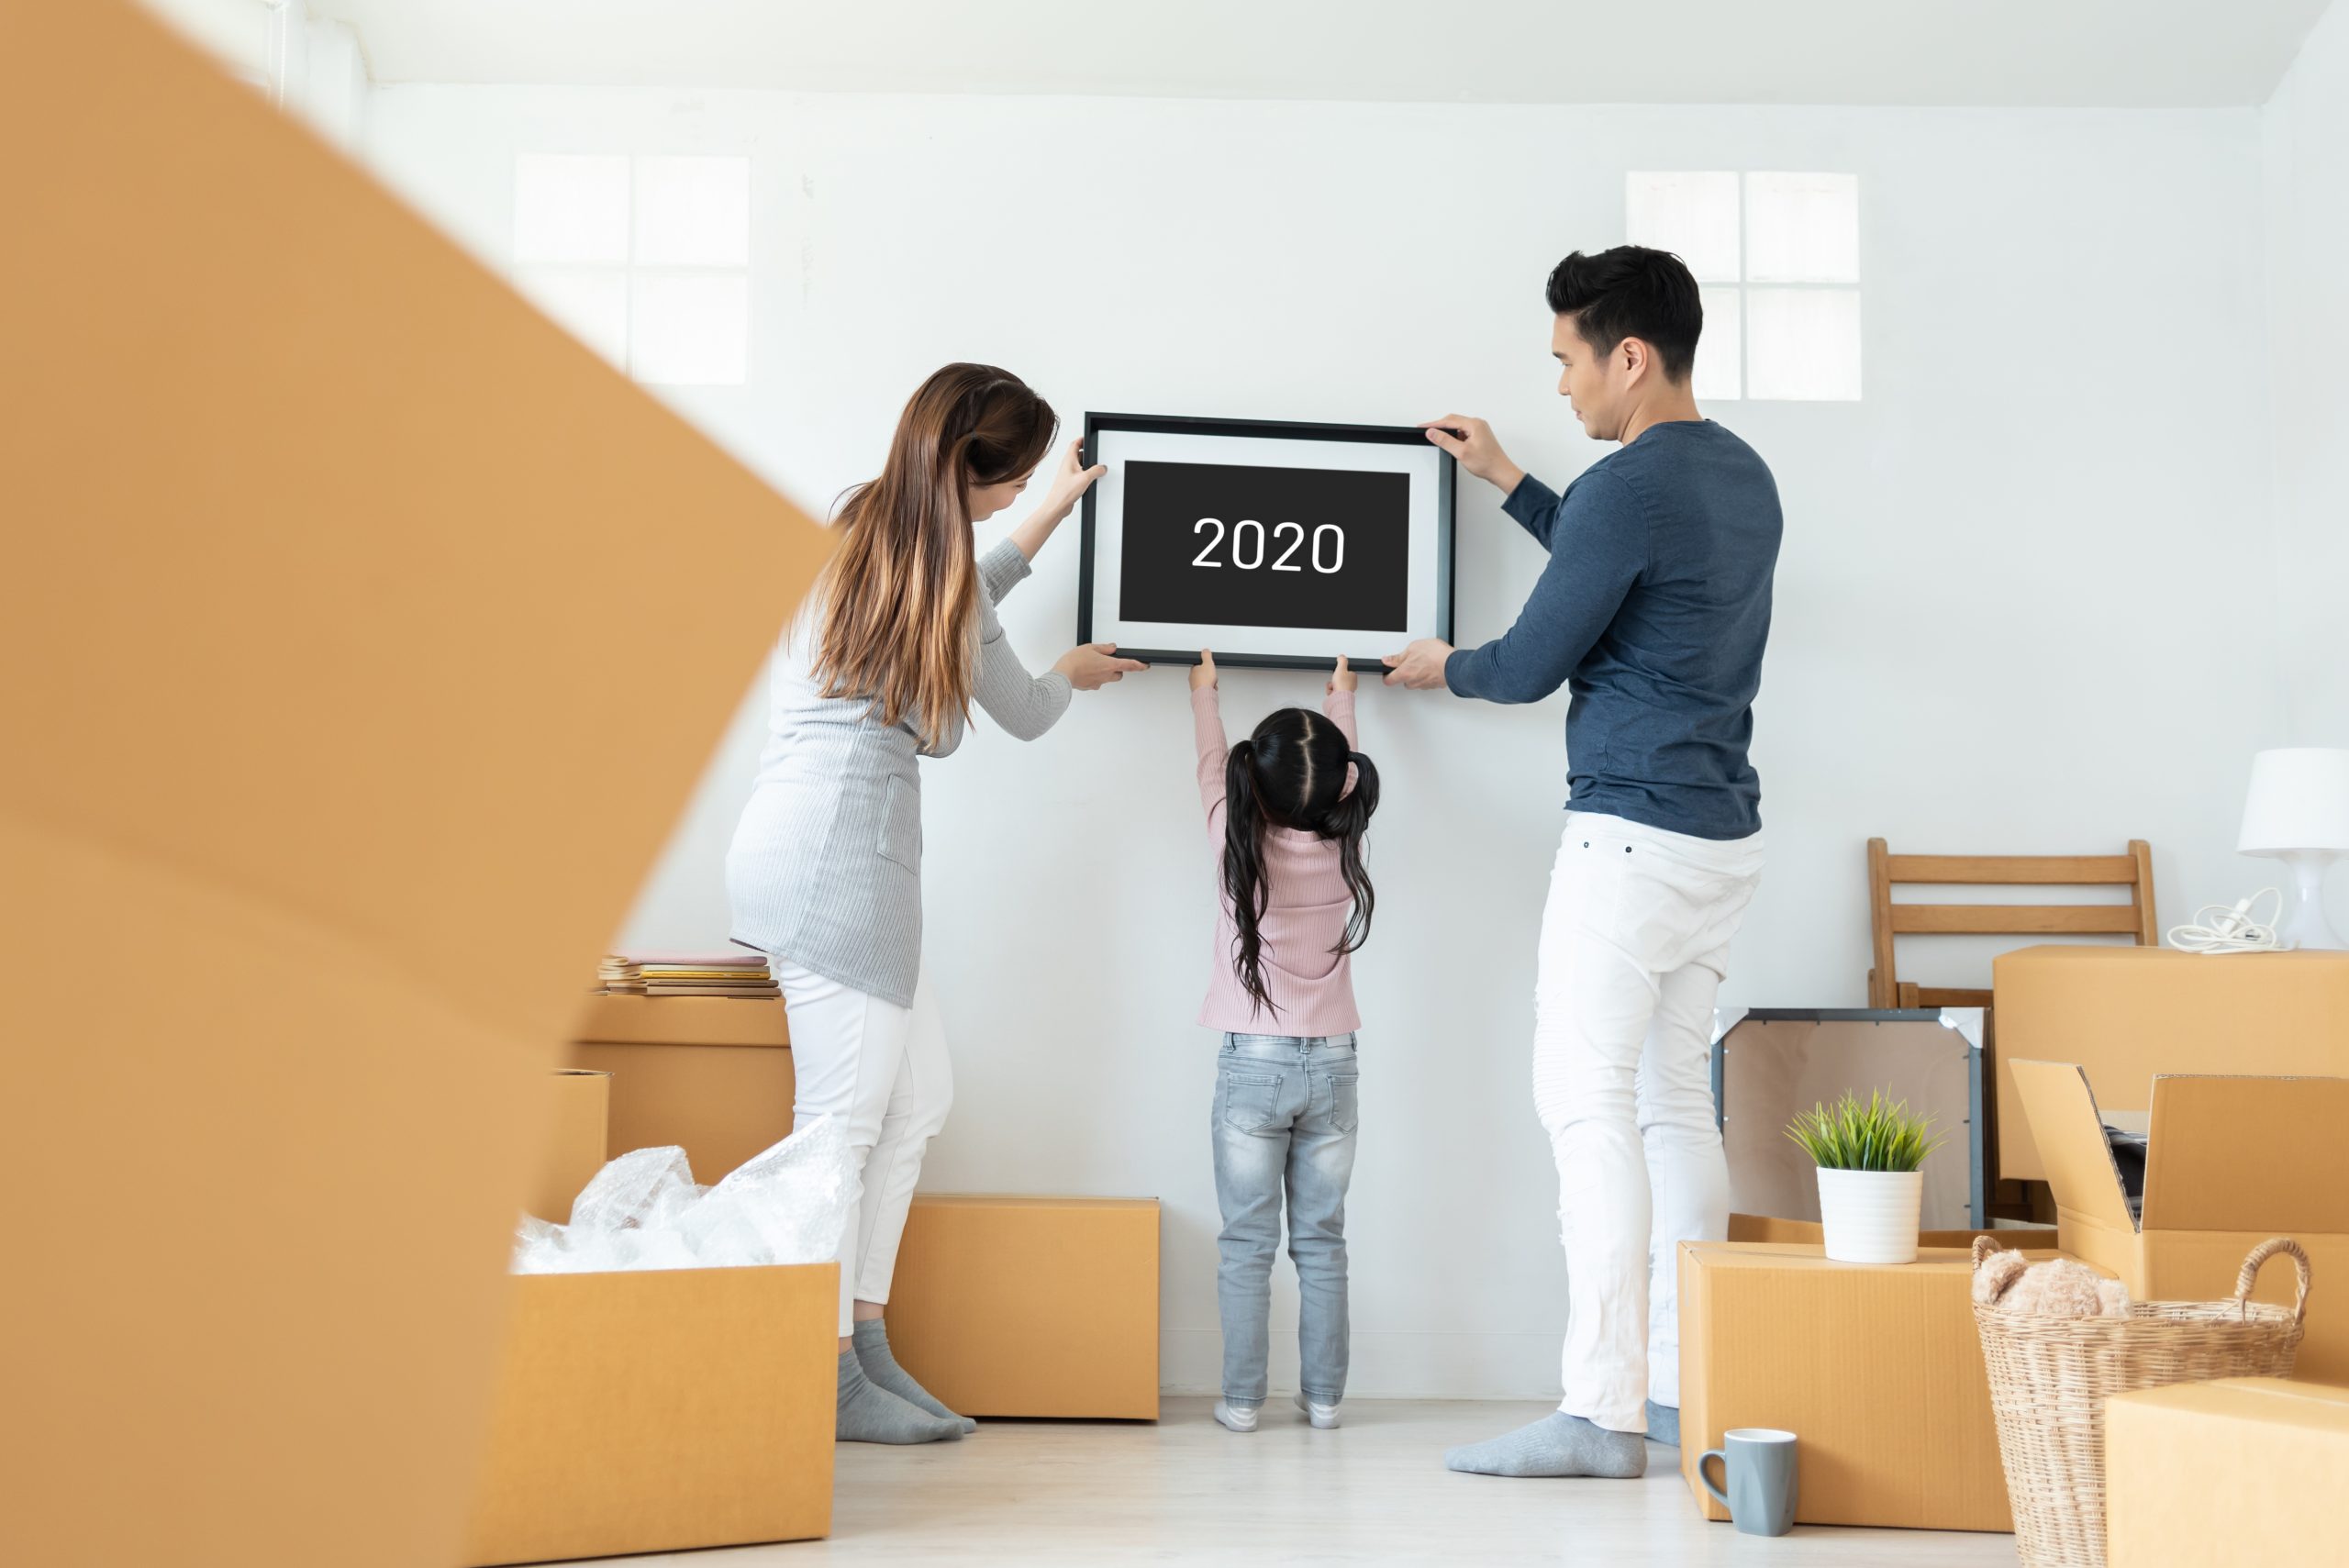 An Overview: What happened to the UK property market in 2020?